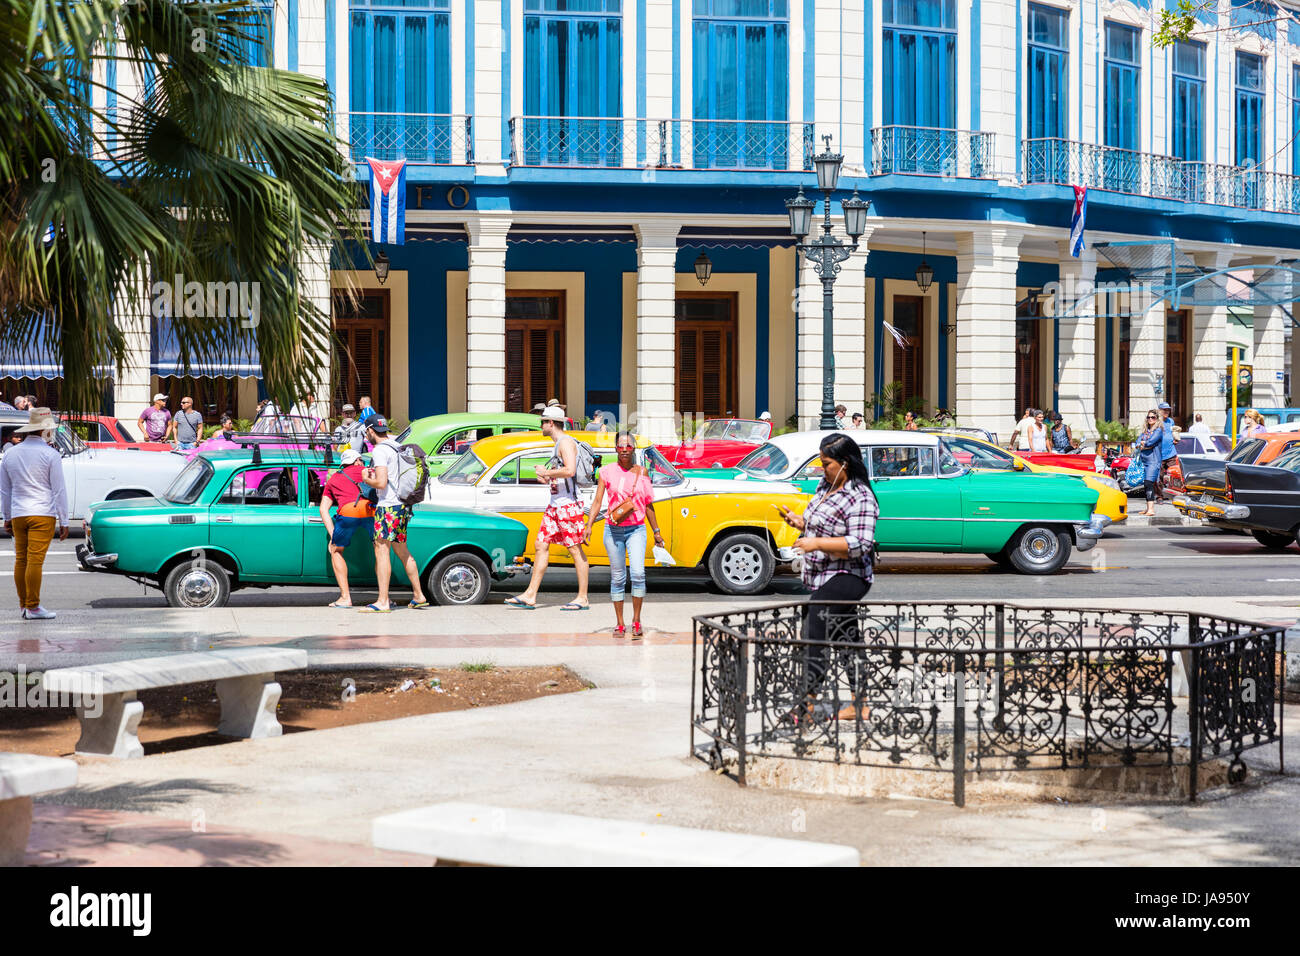 Parque central, People on streets of Havana, Locals, tourists, Havana, Cuba, Cuban street, Havana street, old cars, tourism, Stock Photo